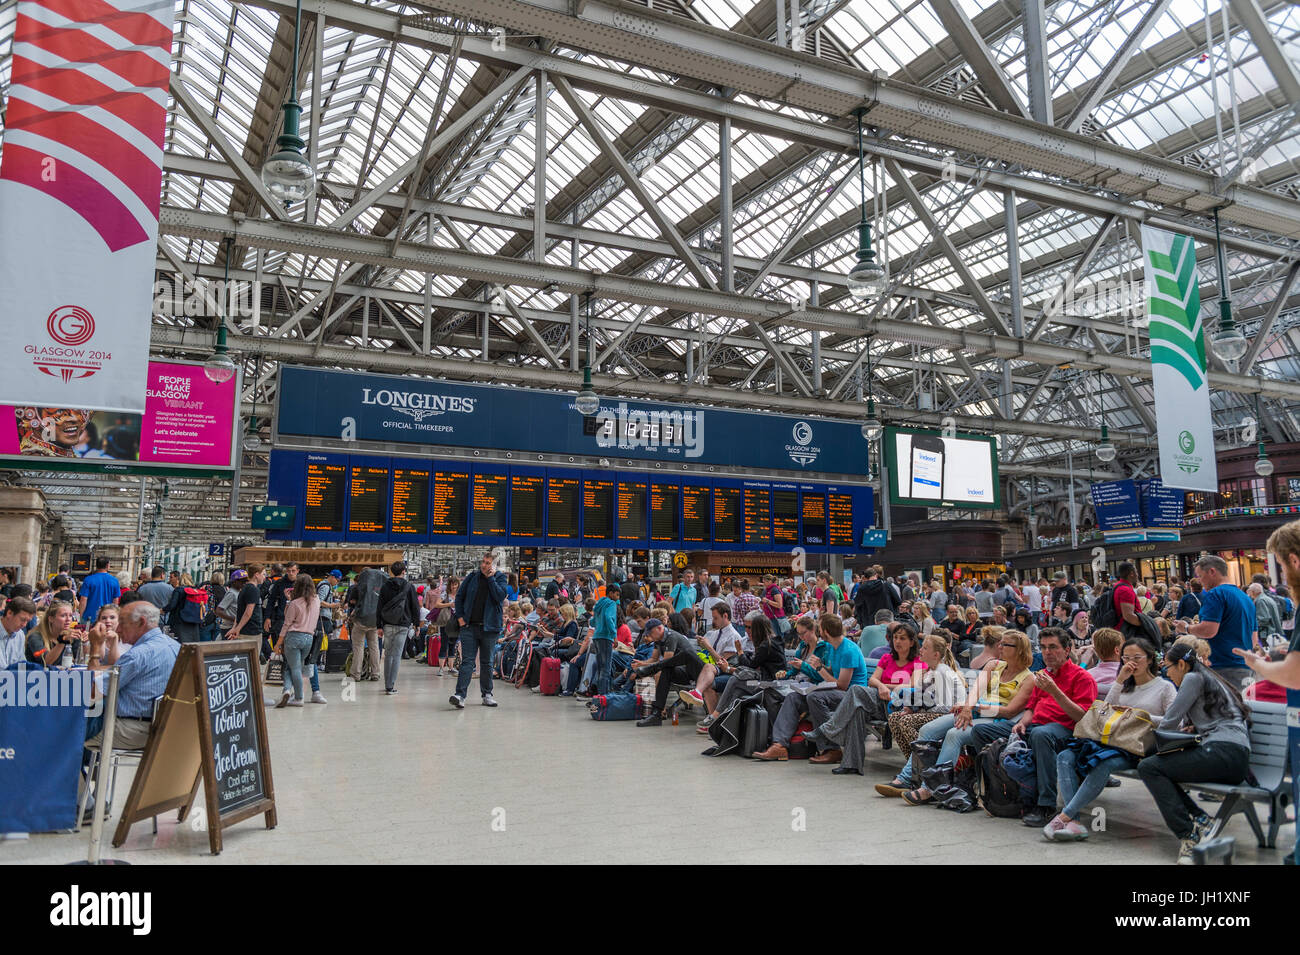 Glasgow, Scotland, UK - August 1, 2014: Members of the public on the concourse of Central Station during the 2014 Commonwealth Games in Glasgow.zz Stock Photo